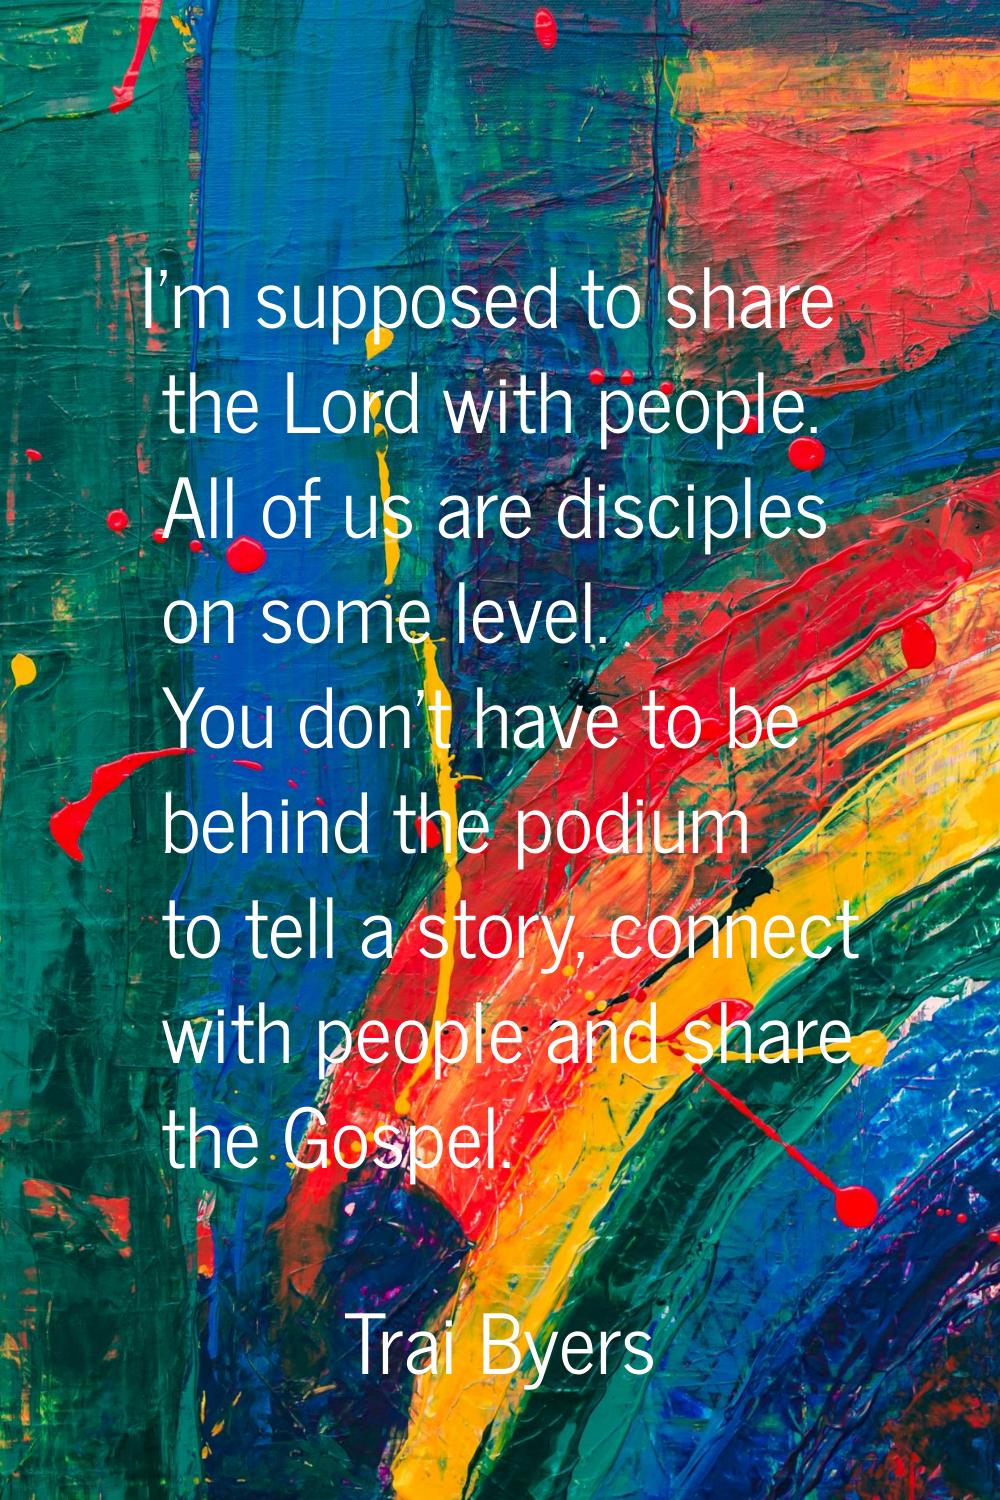 I'm supposed to share the Lord with people. All of us are disciples on some level. You don't have t